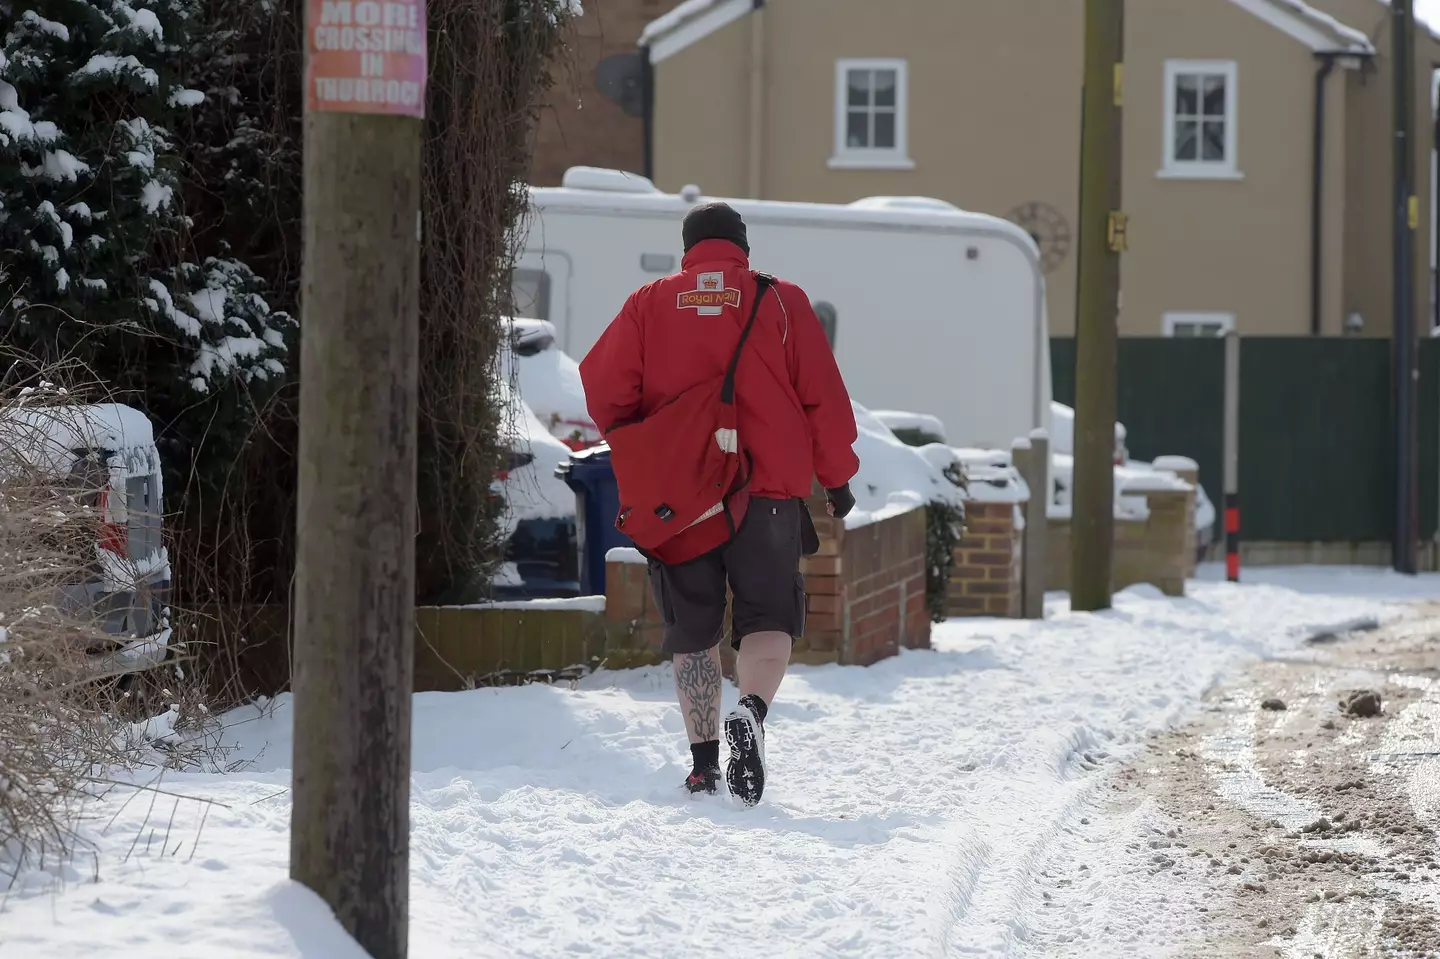 Many posties are known to wear shorts all year round.